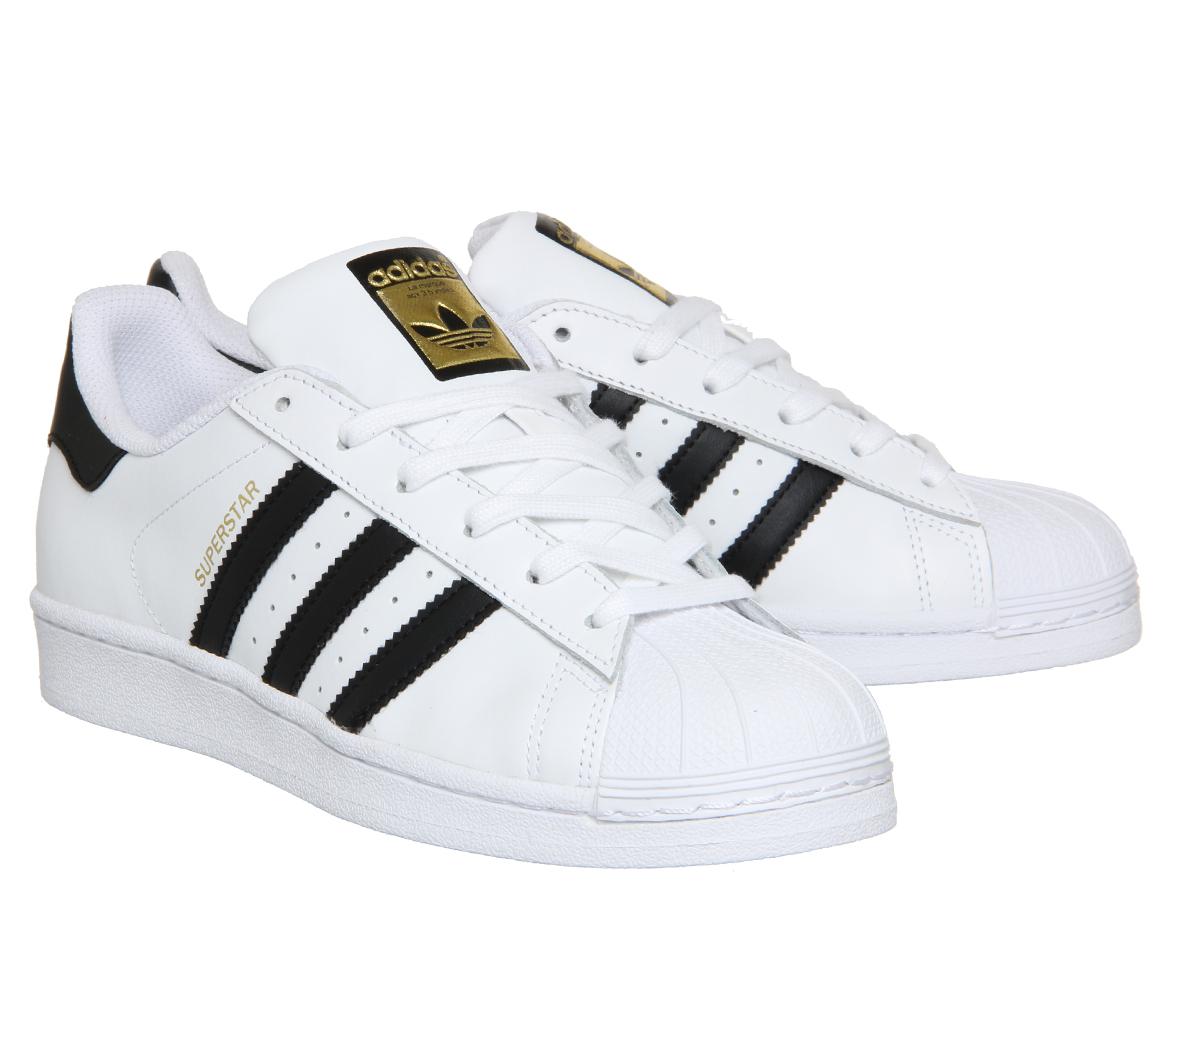 adidas Superstar White Black Foundation - Hers trainers